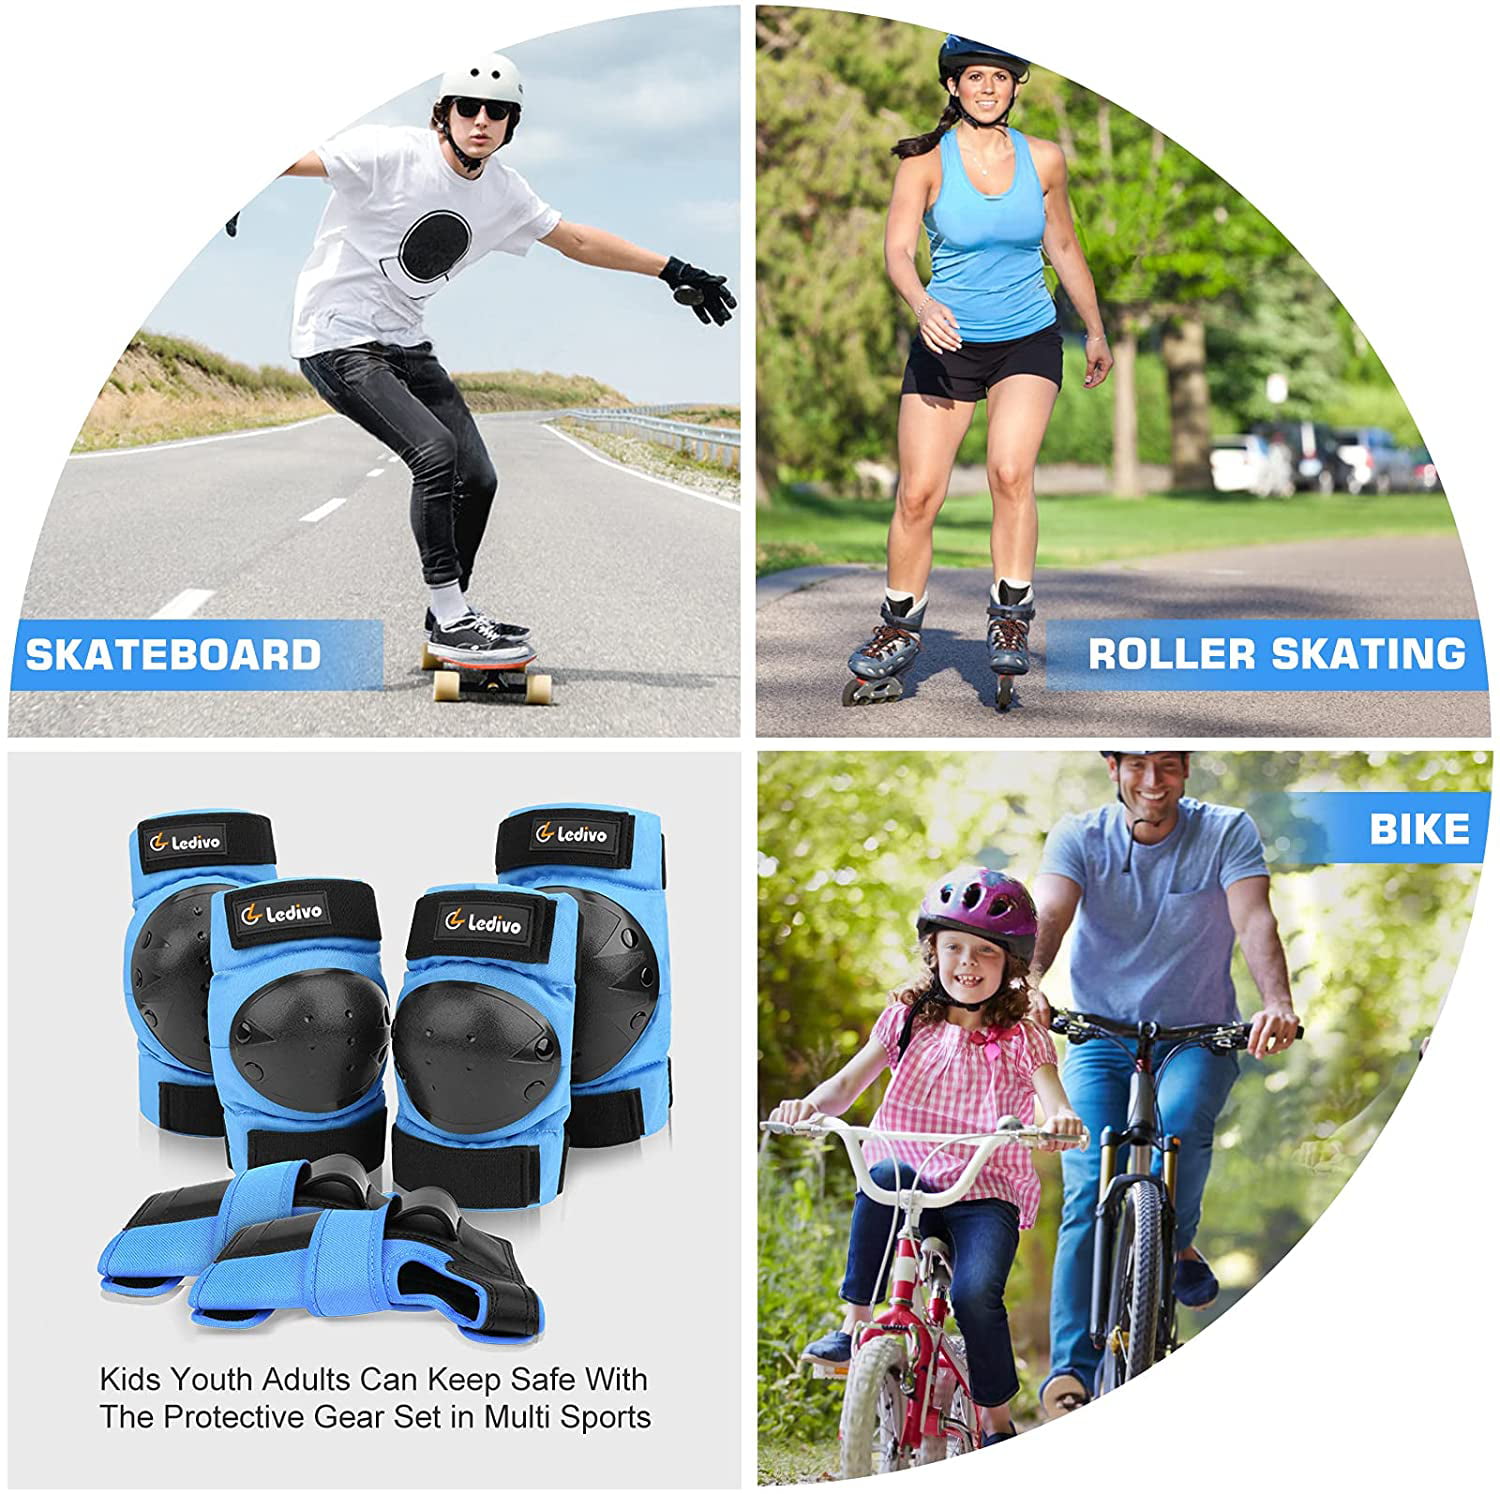 Safety Protective Gear for Roller Skates Cycling BMX Bike Skateboard Inline Skatings Scooter Riding and Other Extreme Sports 6-in-1 Sports Knee Elbow Wrist Pads Guards Knee Pads for Kids/Youth 